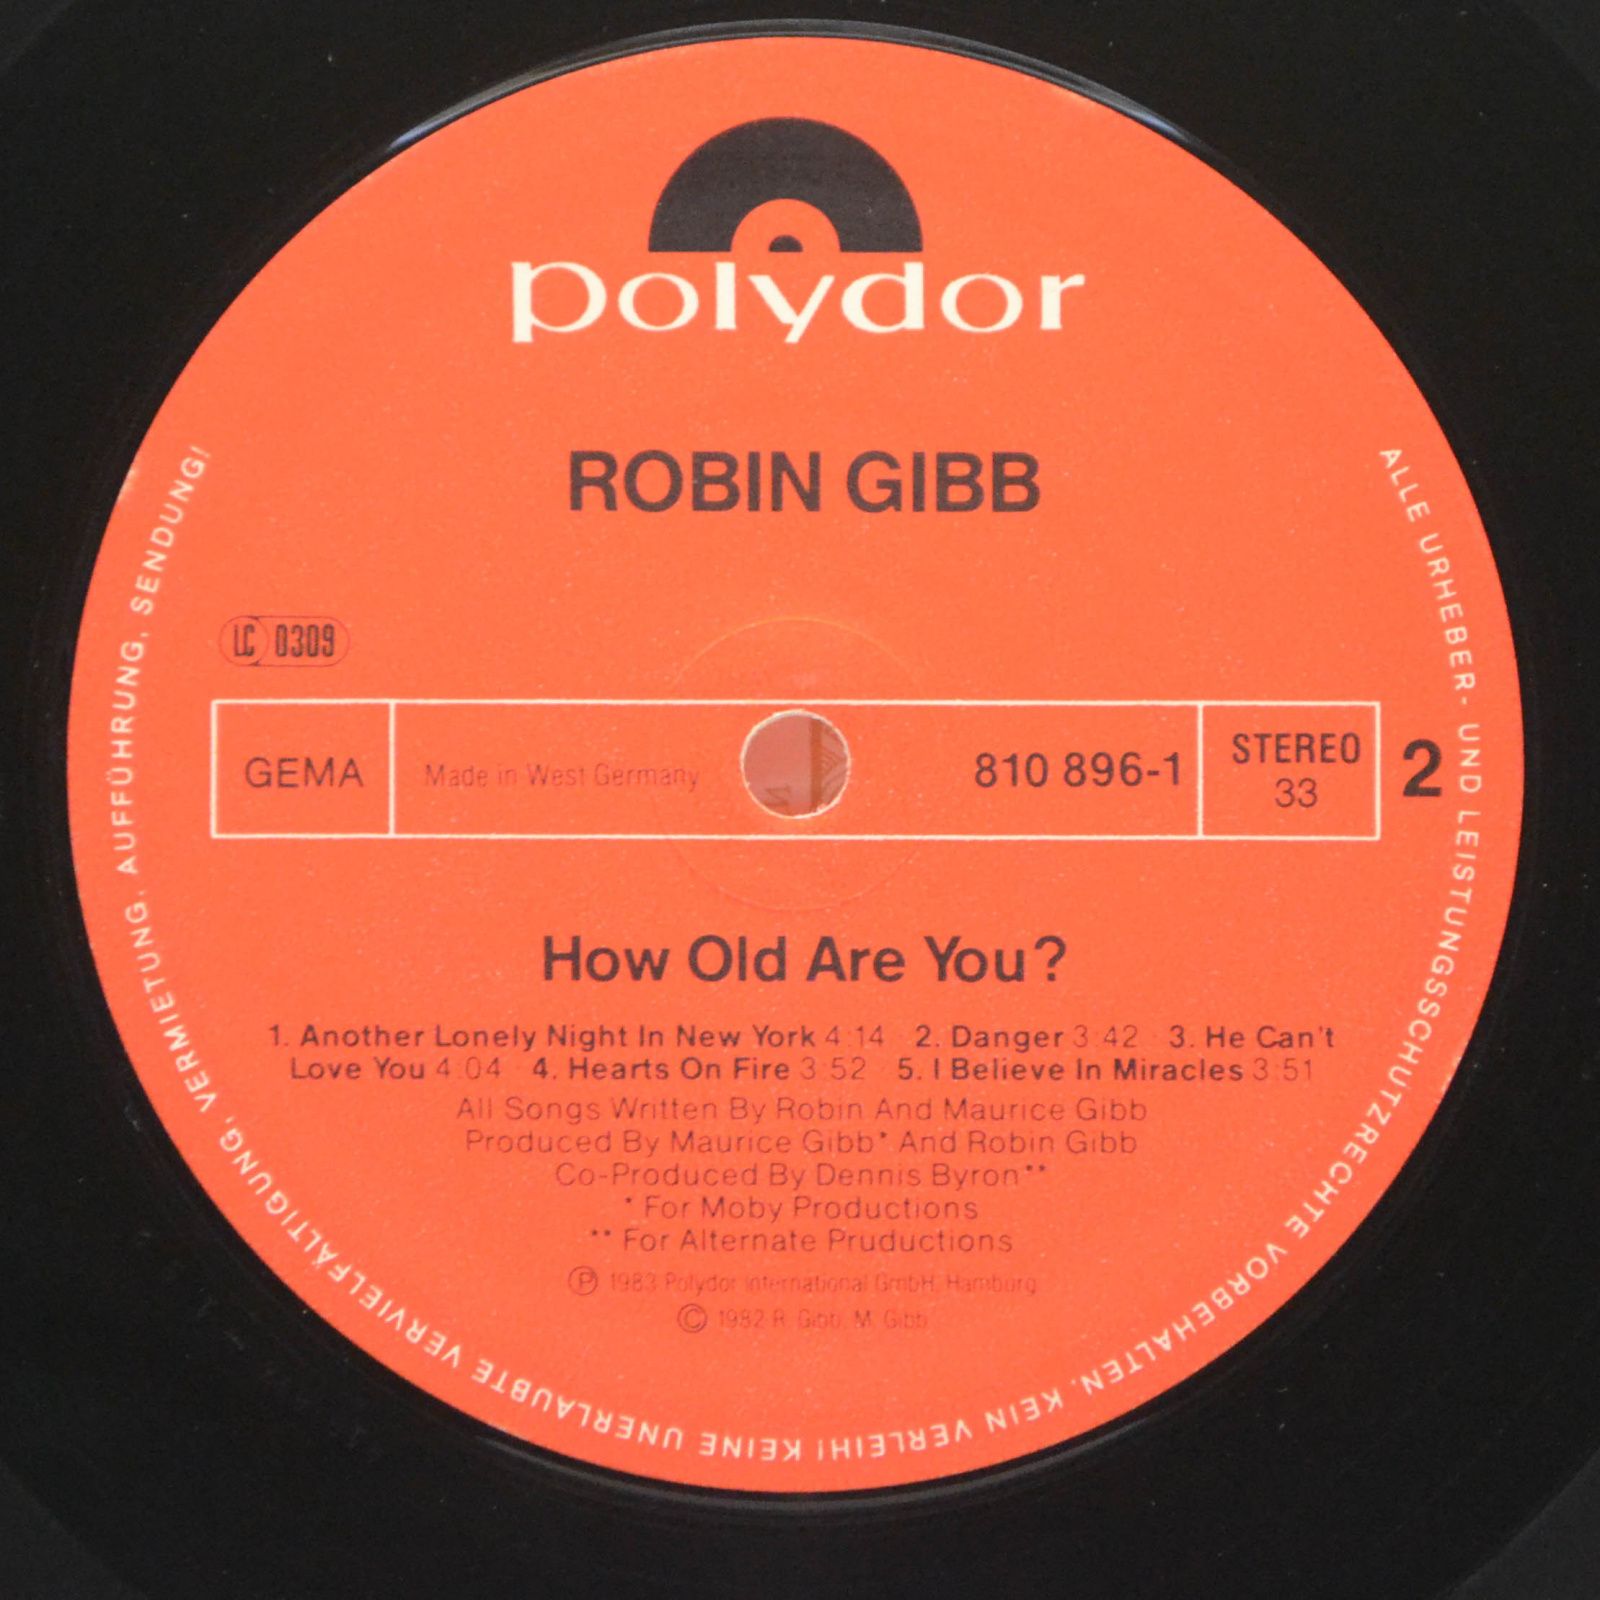 Robin Gibb — How Old Are You?, 1983